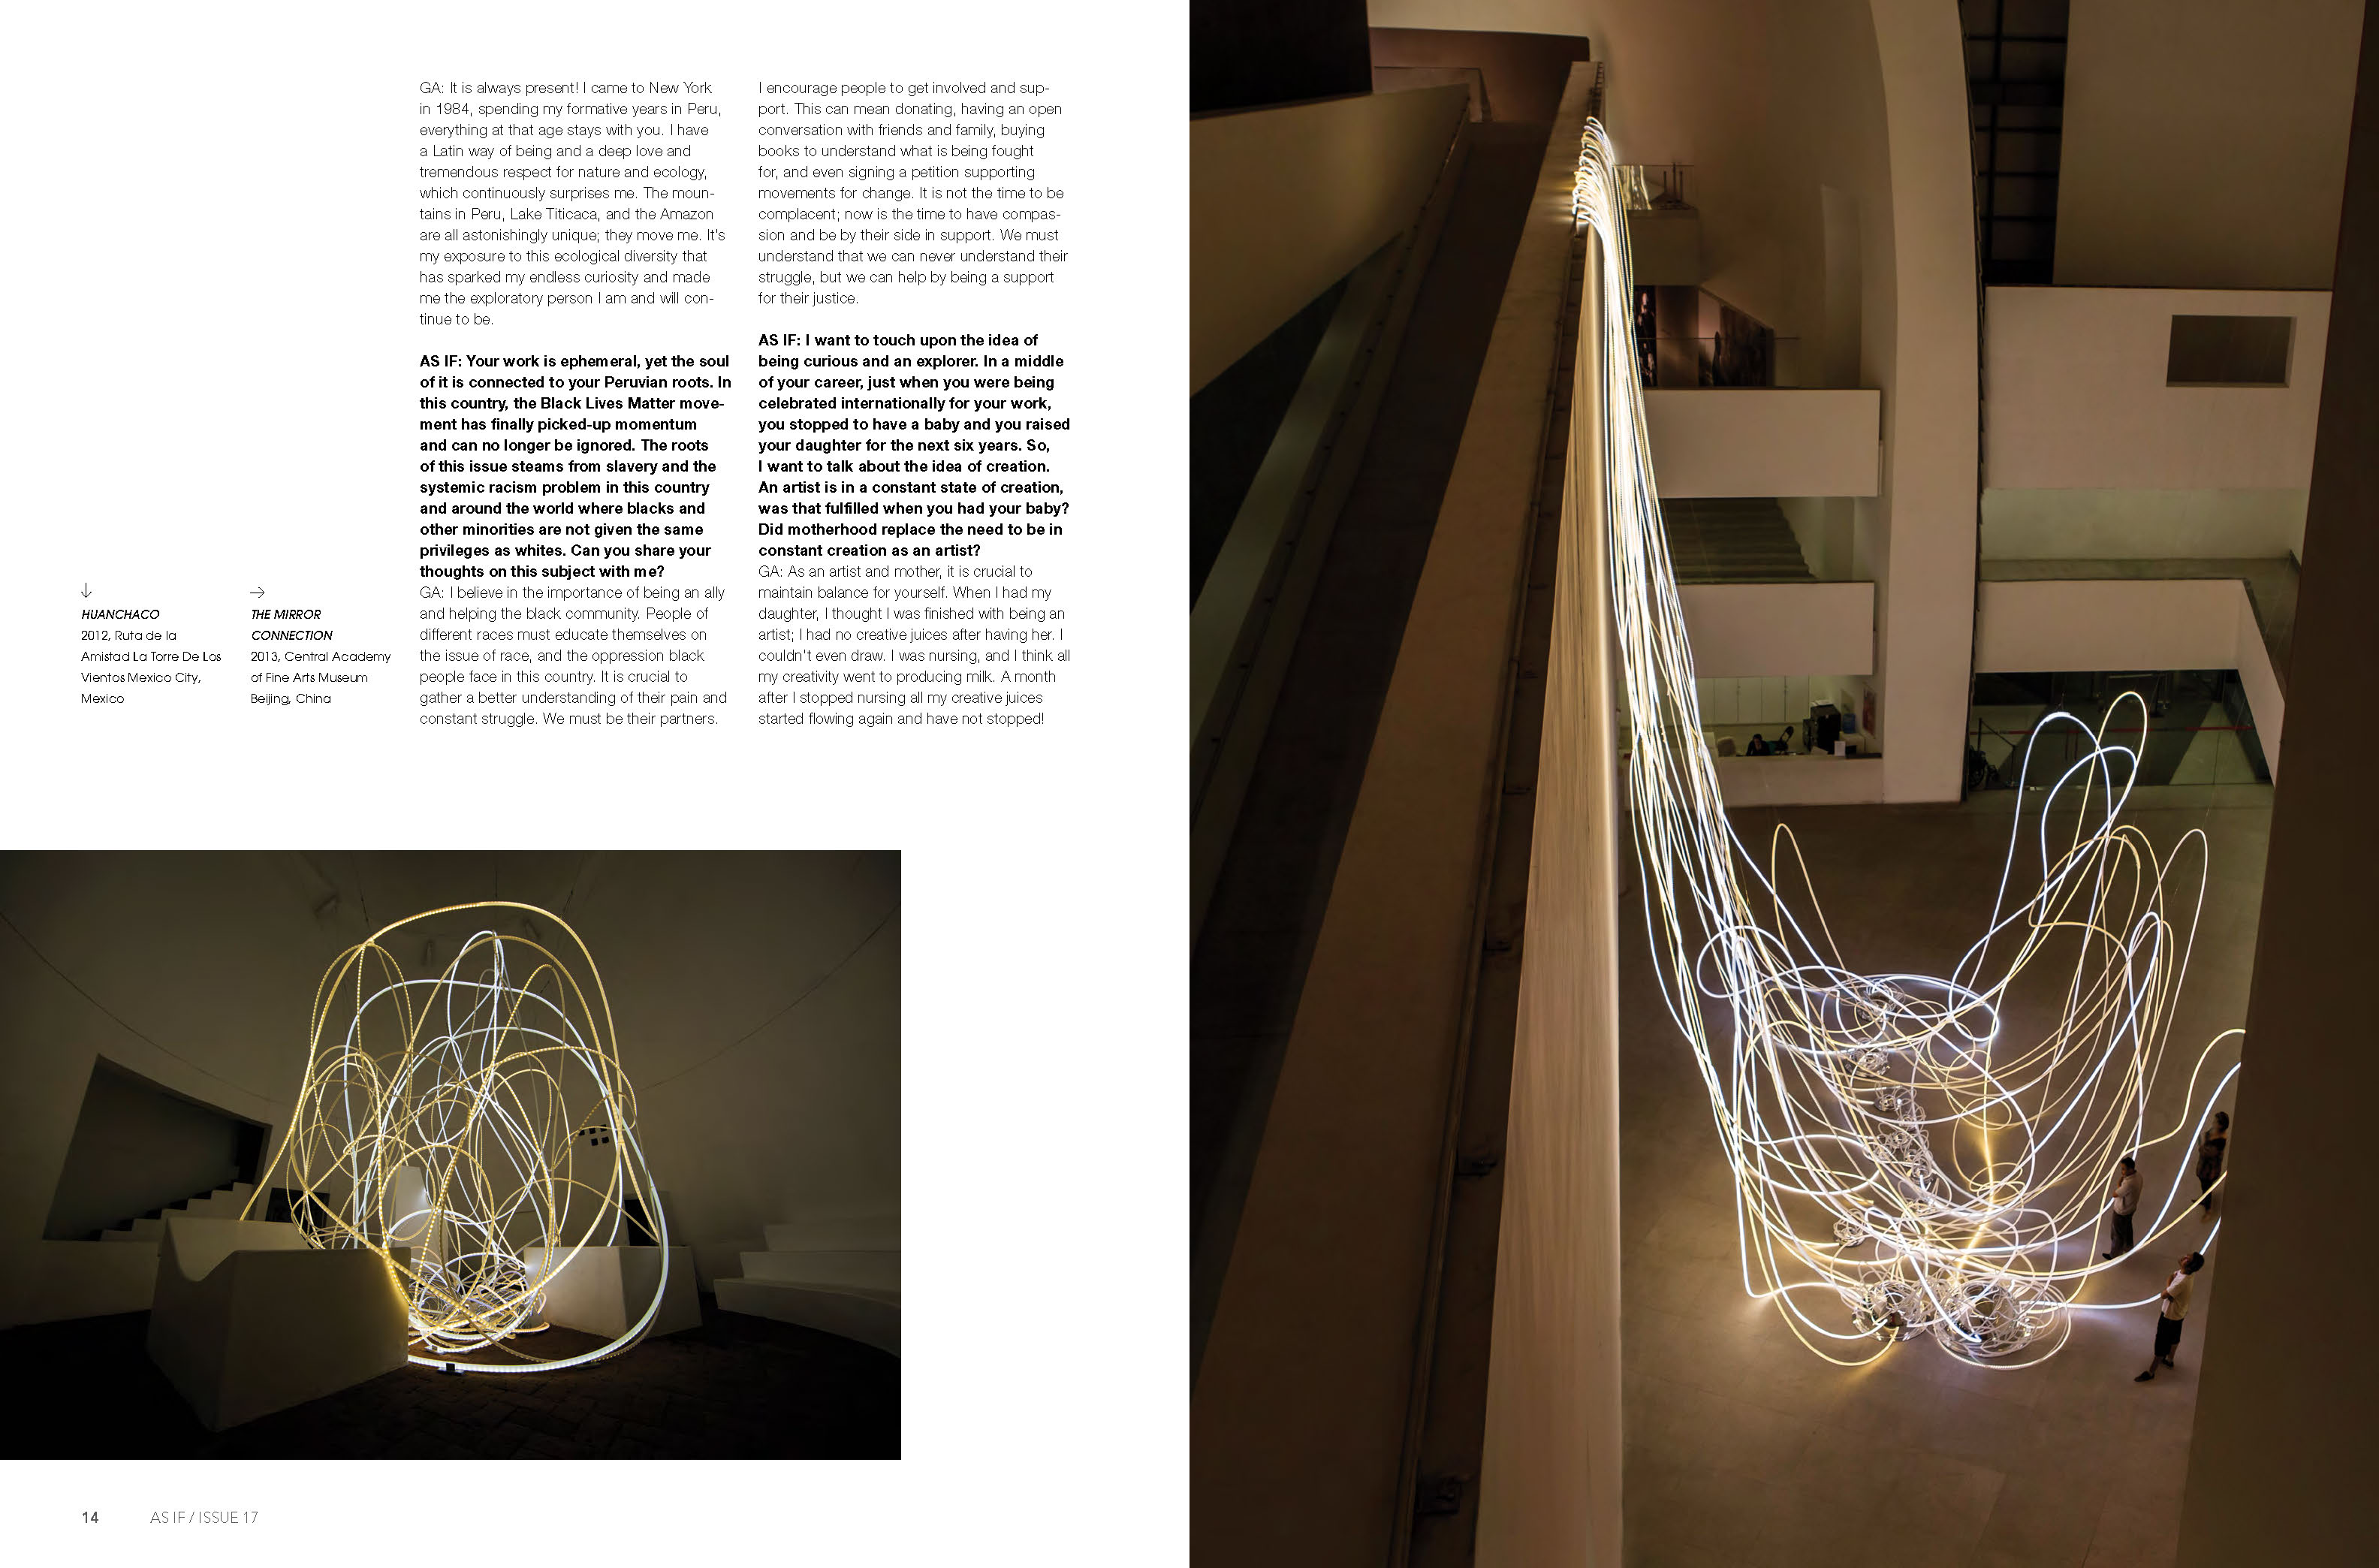 As IF Magazine issue 18 page 07 featuring the work of momental light sculpture artist Grimanesa Amoros Mirror connection CAFA Museum